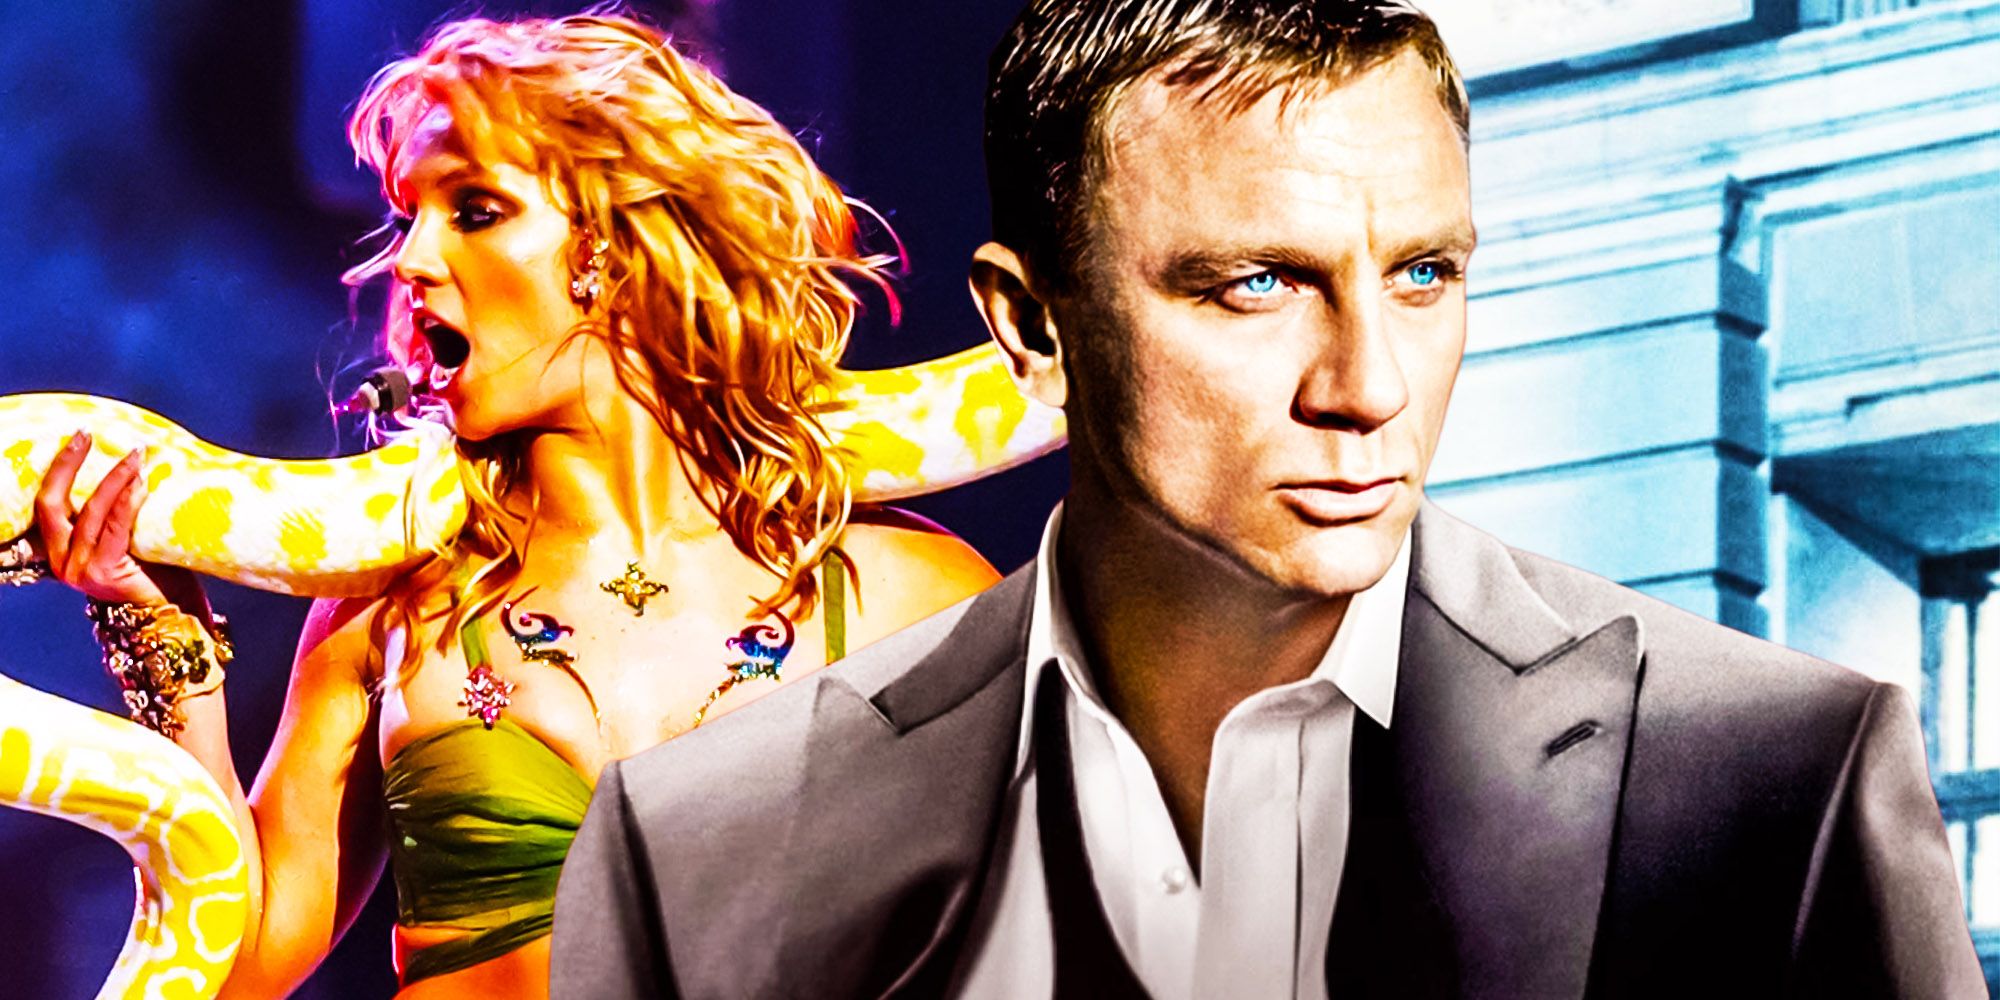 Casino Royale Almost Made Austin Powers’ Britney Spears Scene Real Life